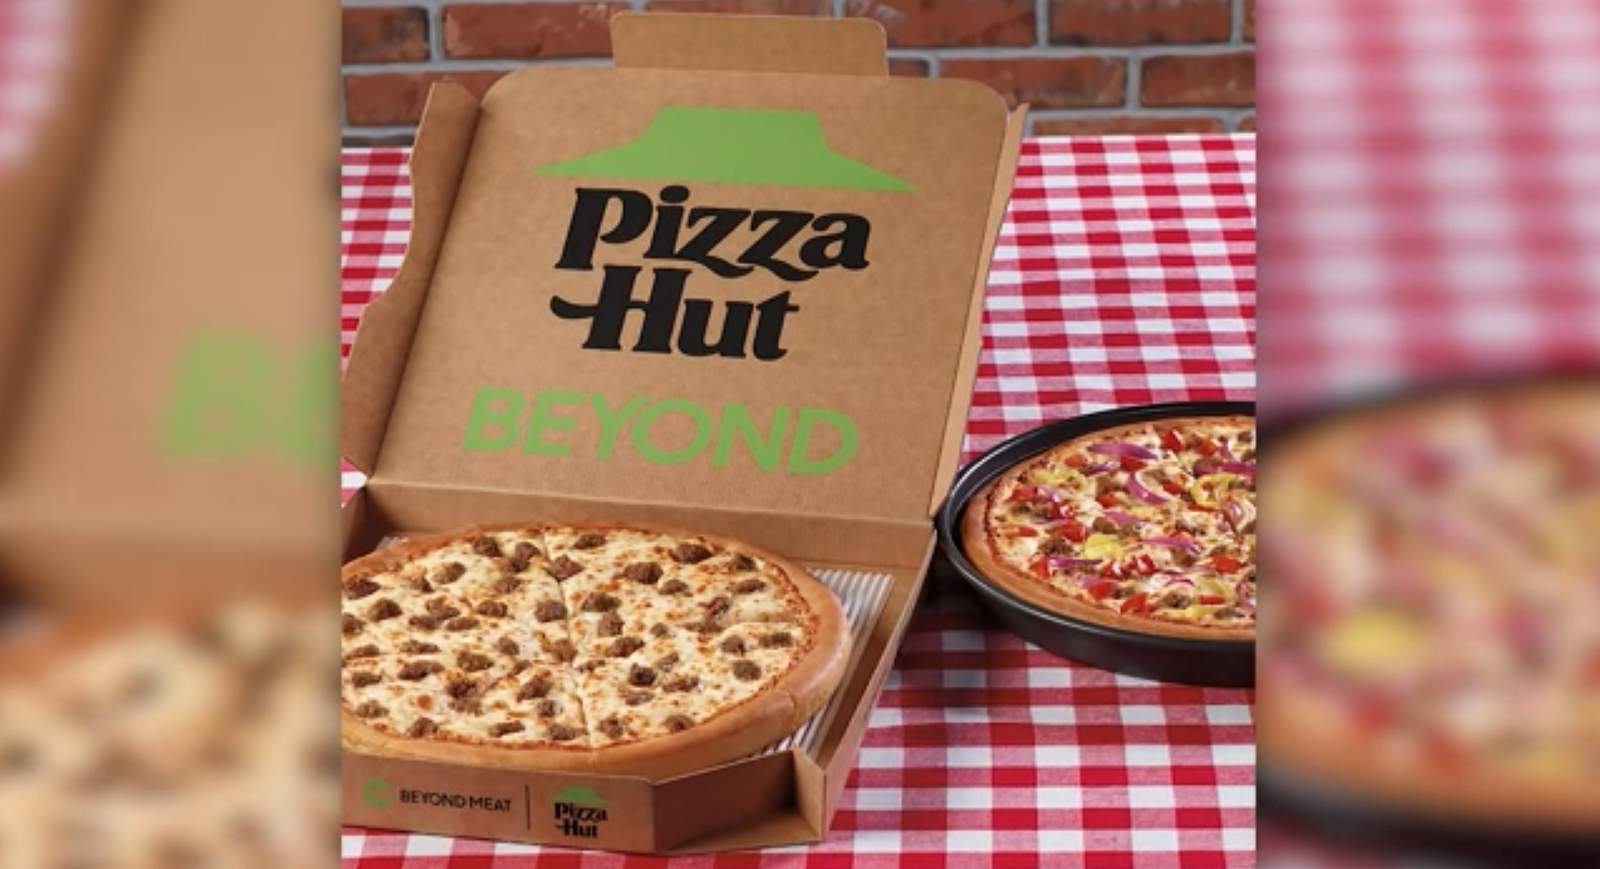 Pizza Hut adds Beyond meat to its menu